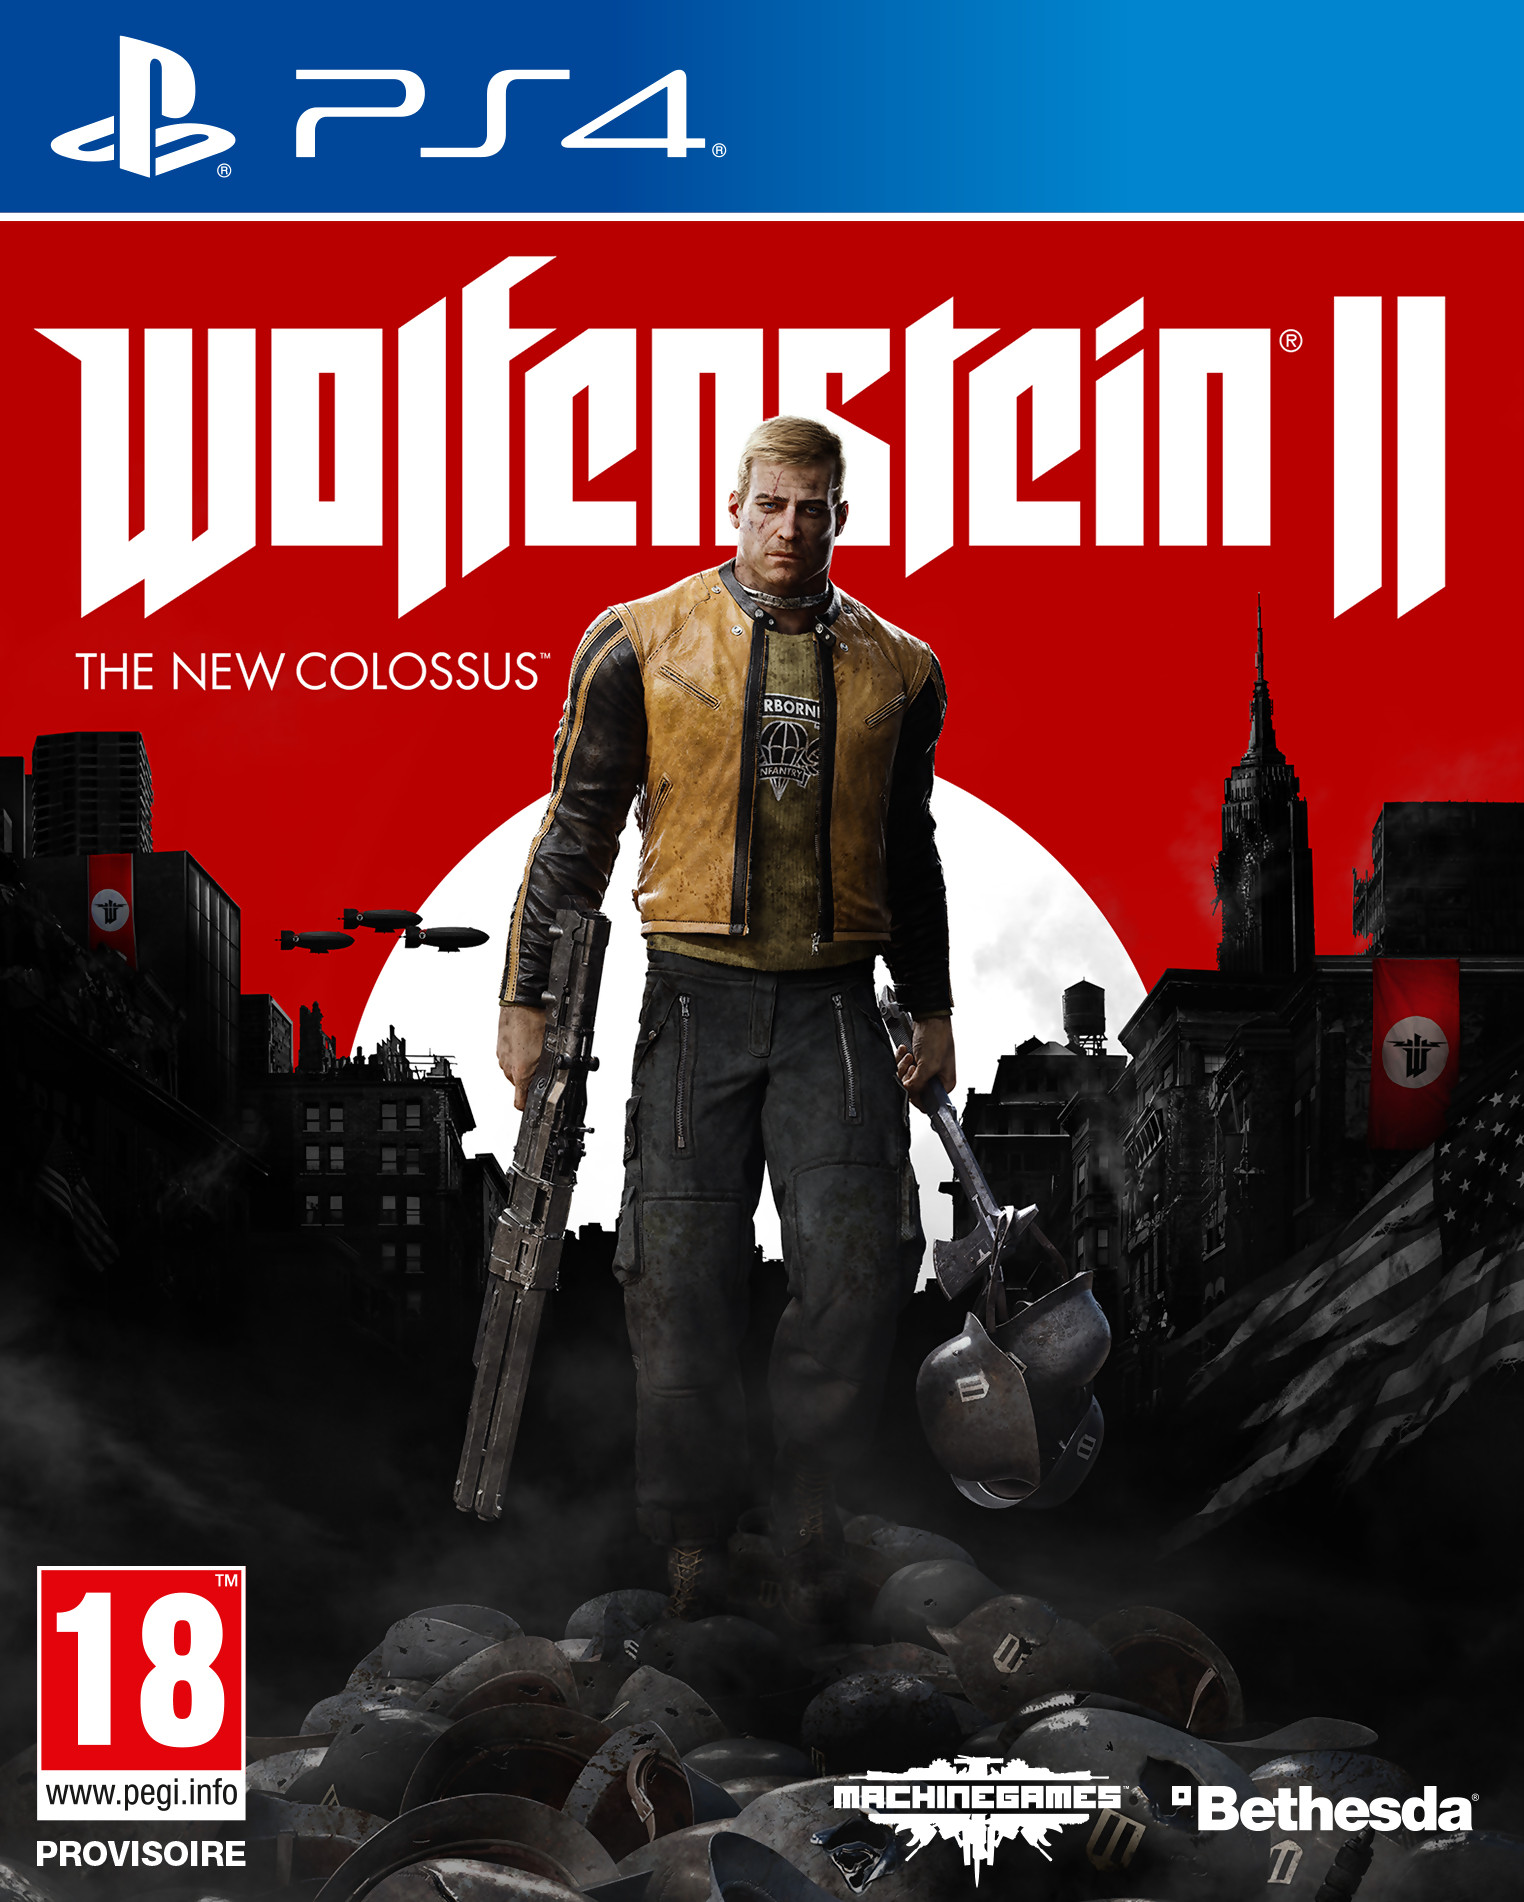 Wolfenstein II: The New Colossus [PS4] 5.05 / 6.72 / 7.02 [EUR] (2017) [Русский] (v1.07)